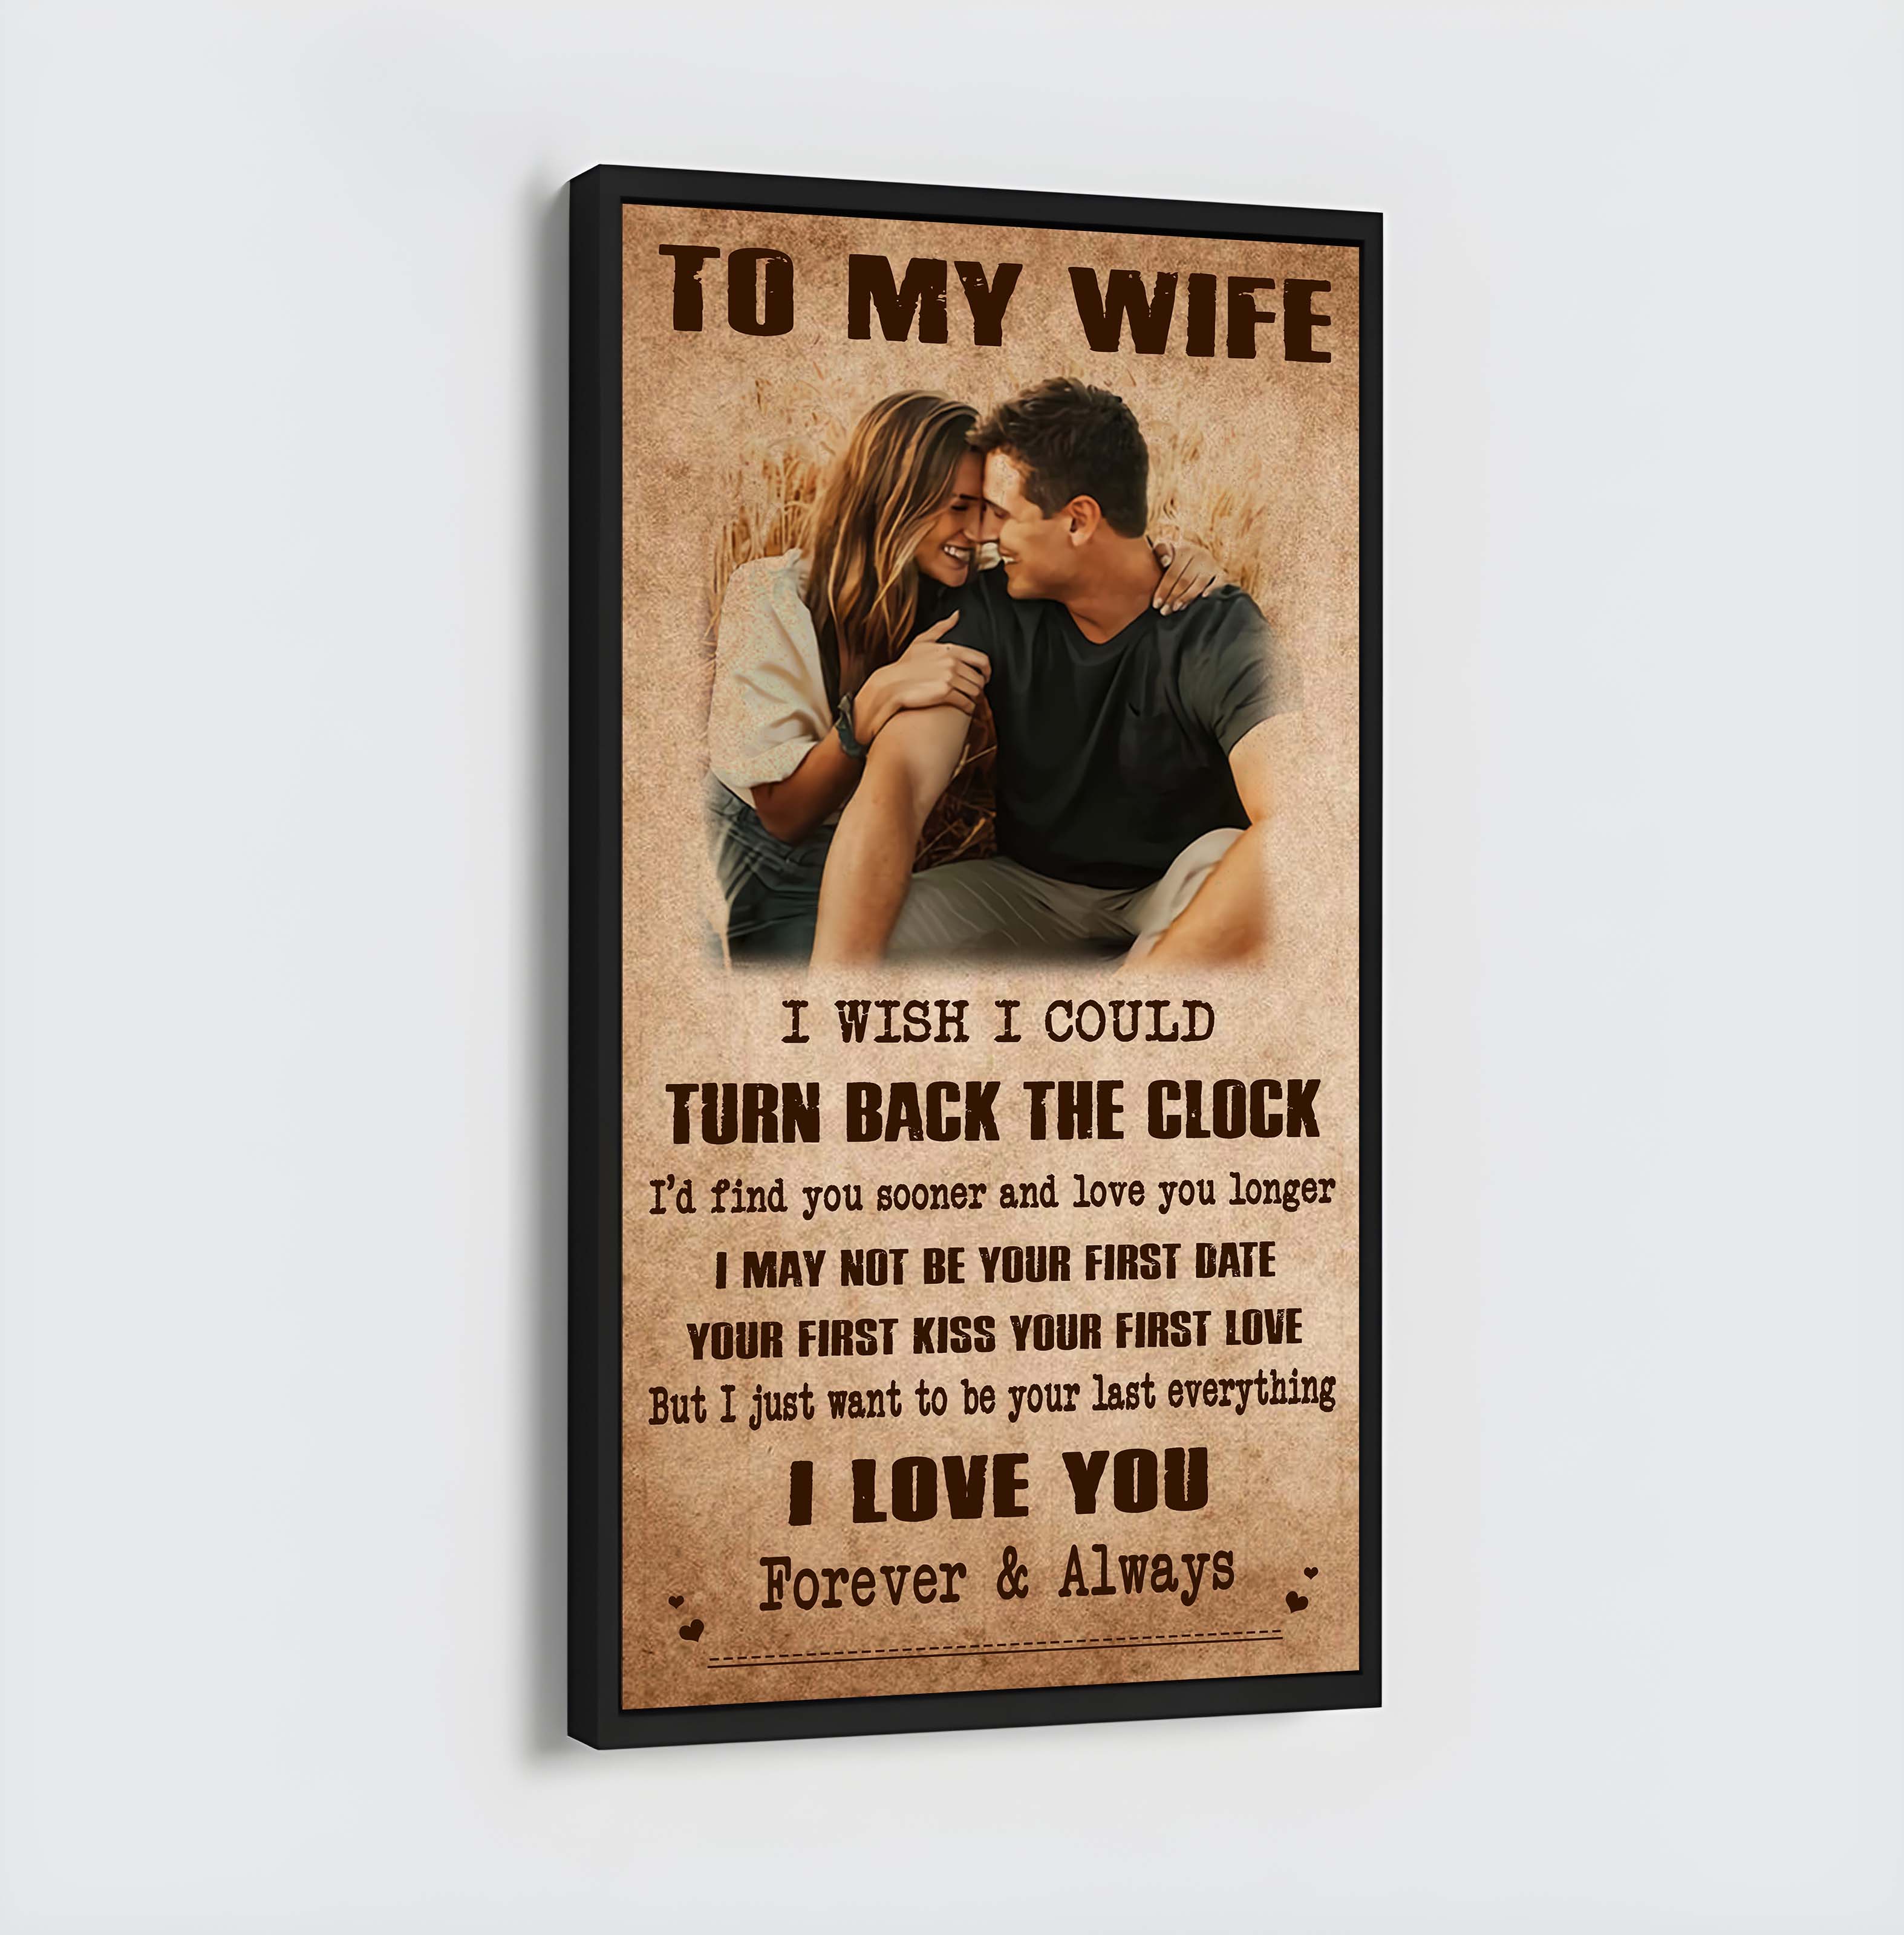 Valentine gifts-Custom image canvas-Husband to Wife- Meeting you was fate